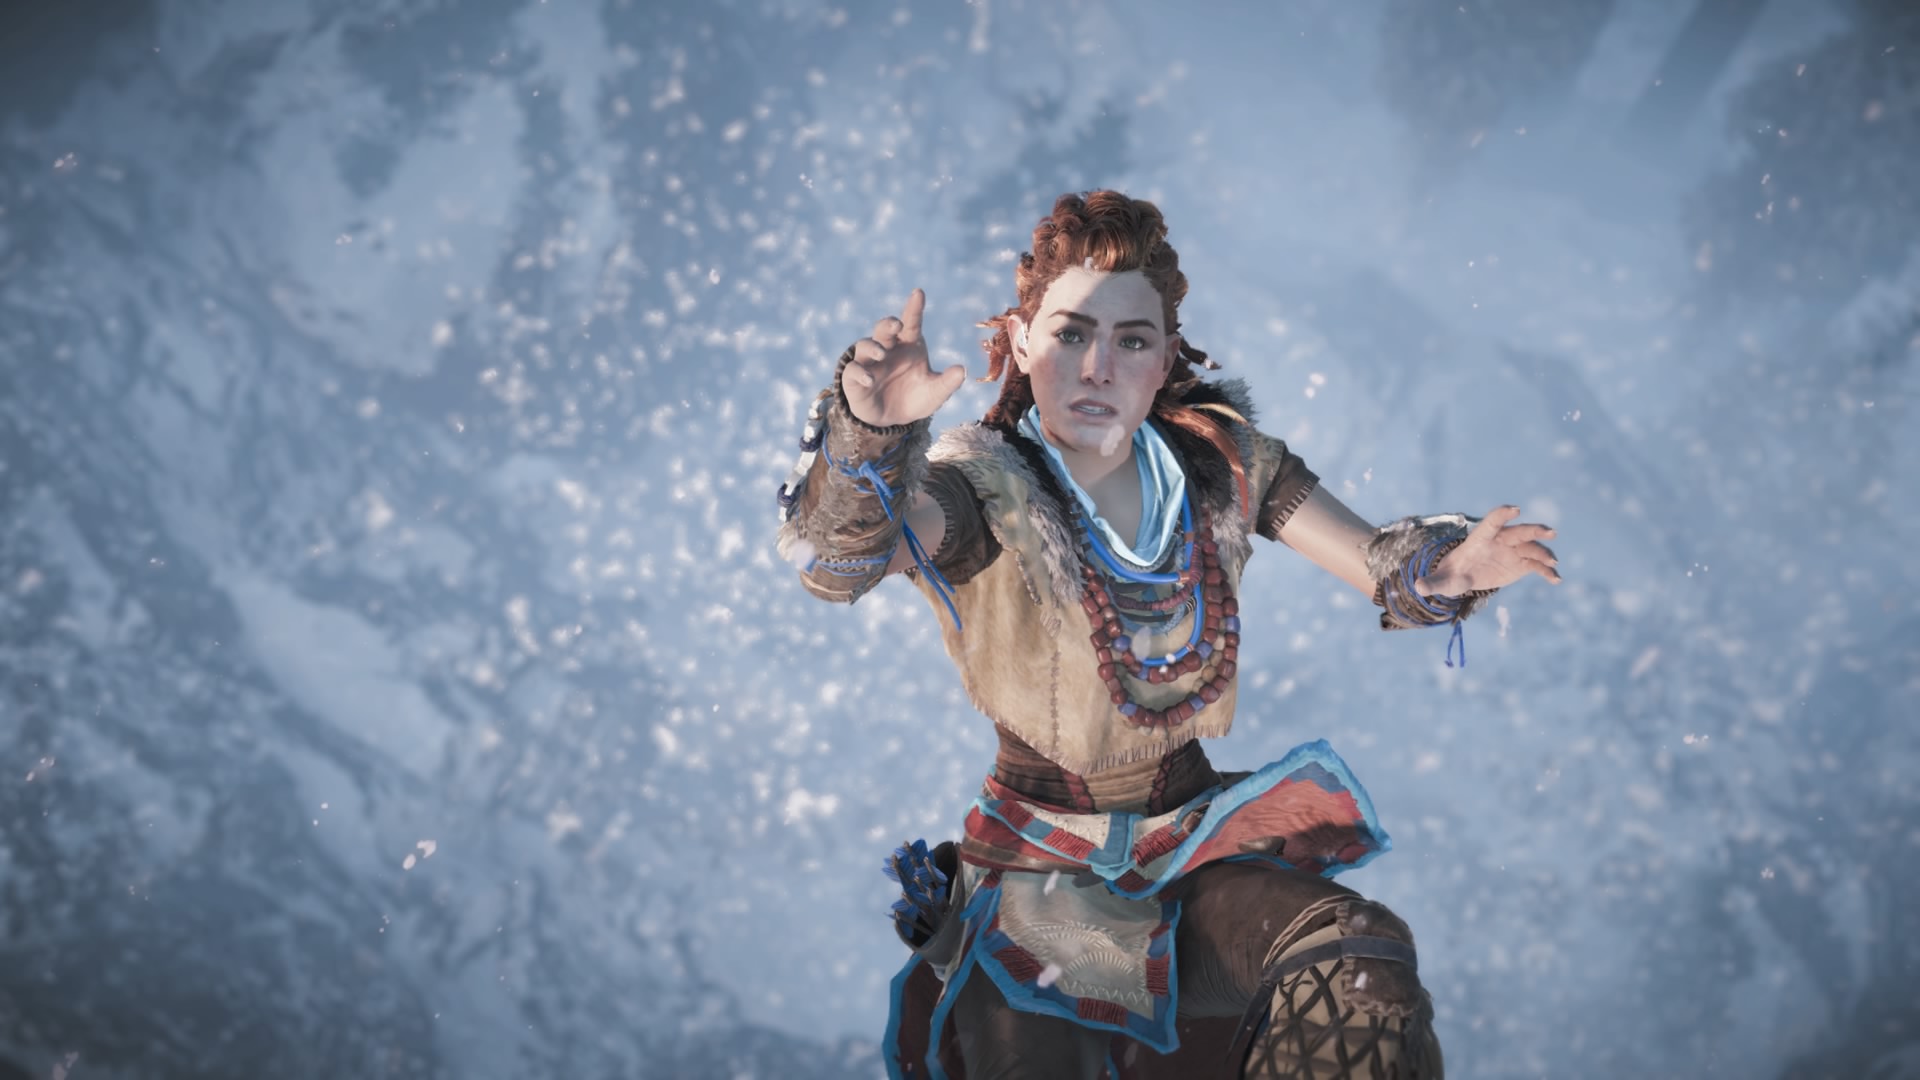 General 1920x1080 Horizon: Zero Dawn Aloy PlayStation 4 video games Video Game Heroes guerrilla games video game characters video game girls